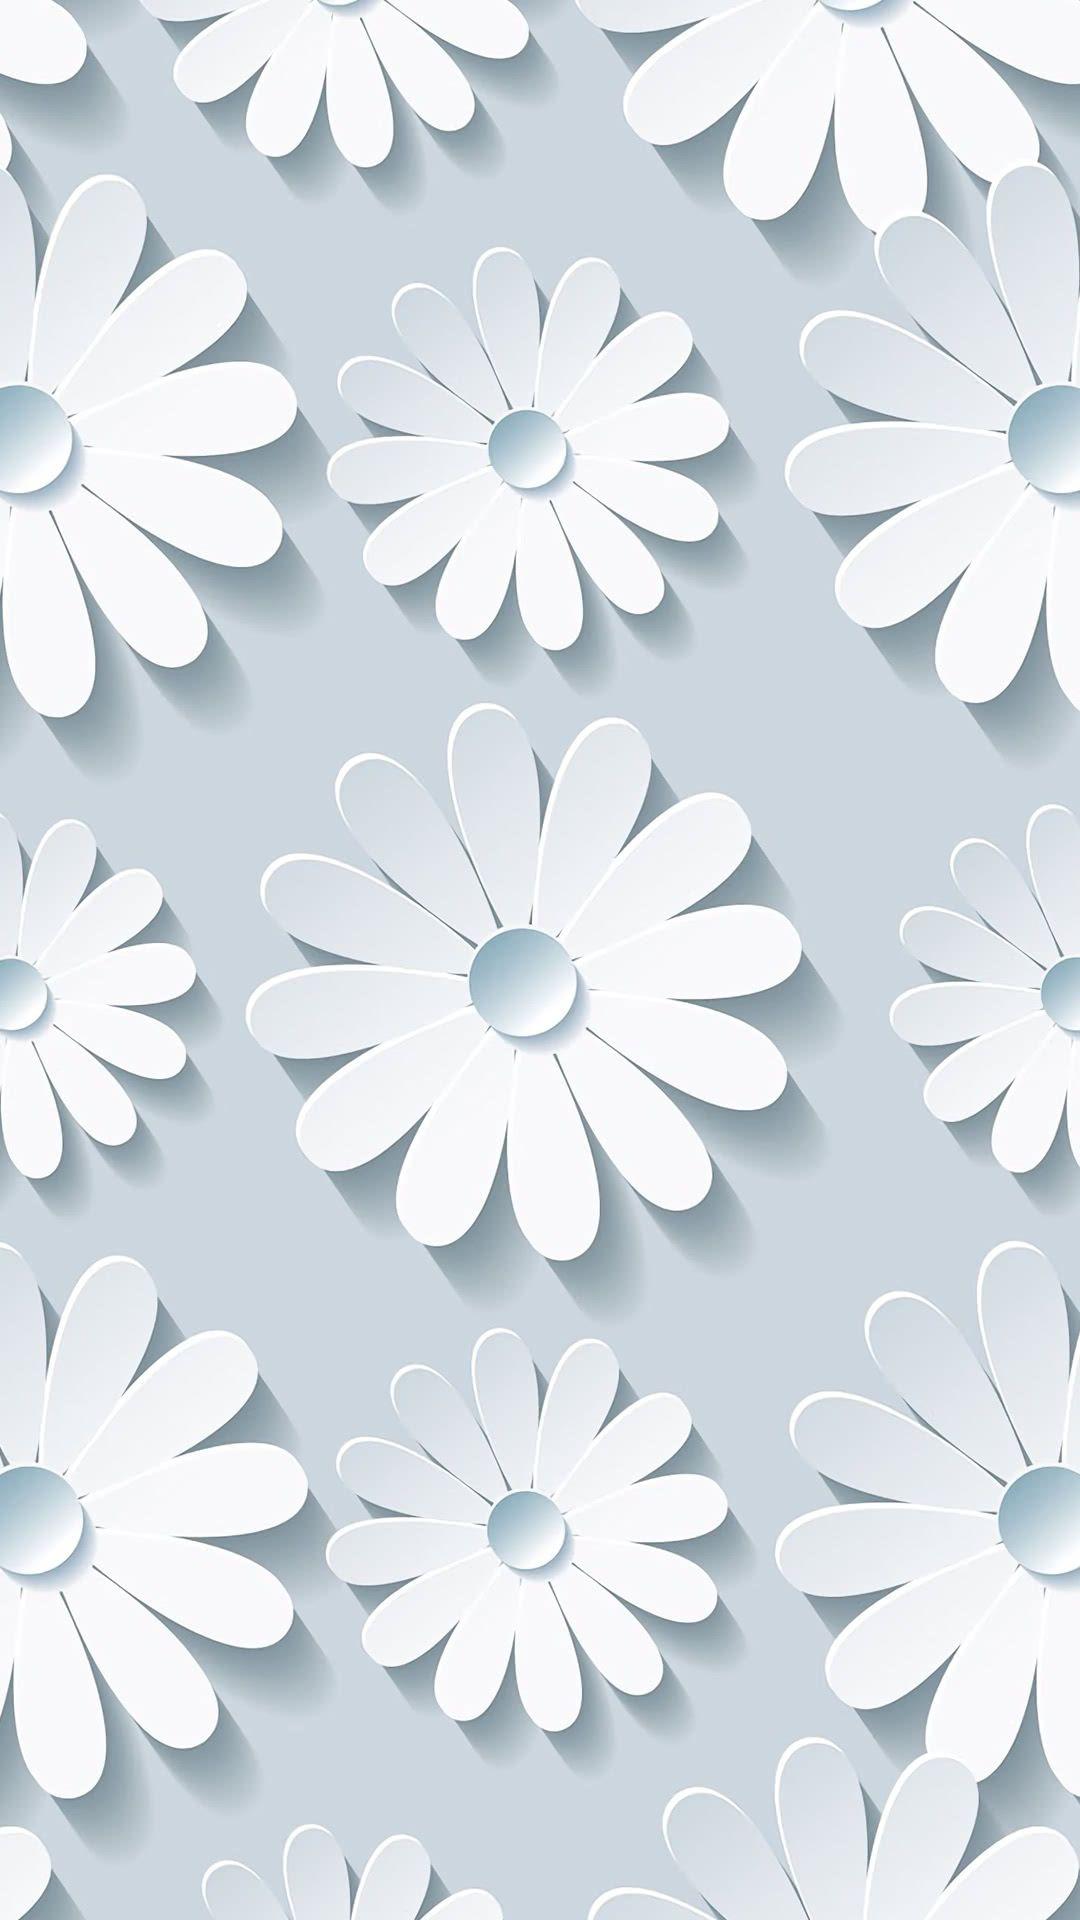 White Flower Iphone Wallpapers Top Free White Flower Iphone Backgrounds Wallpaperaccess